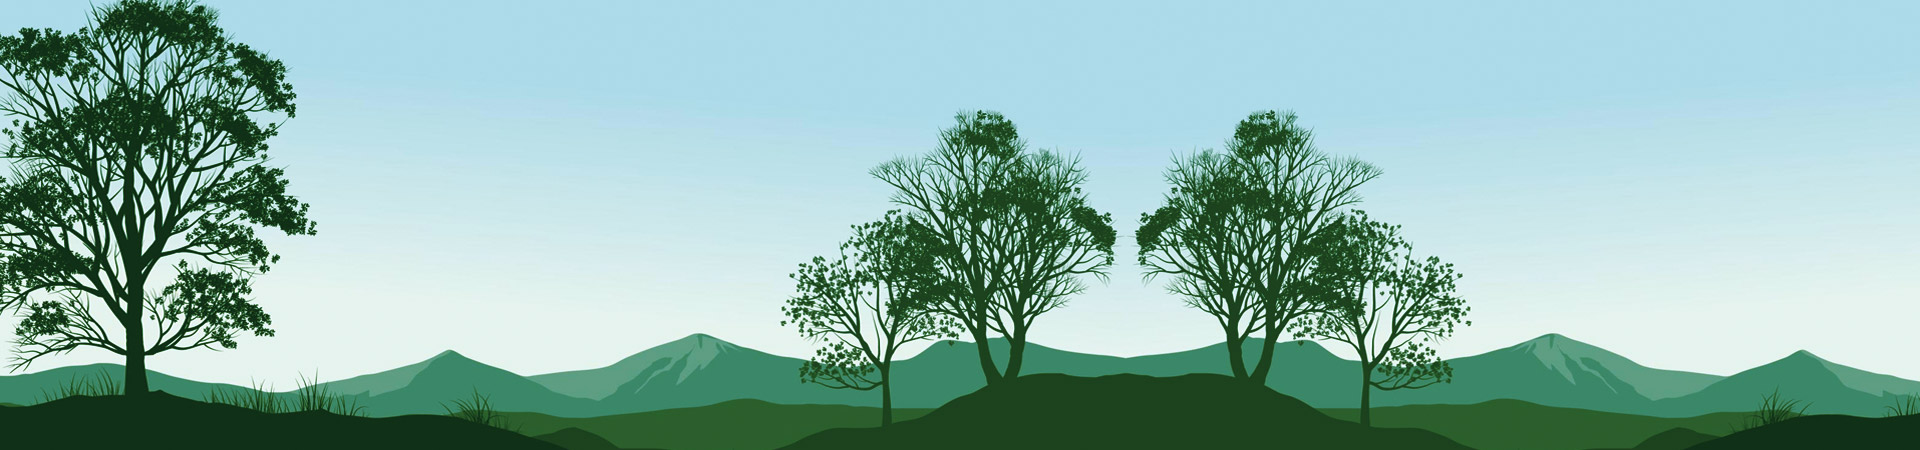 nature background with silhouette of trees mountain